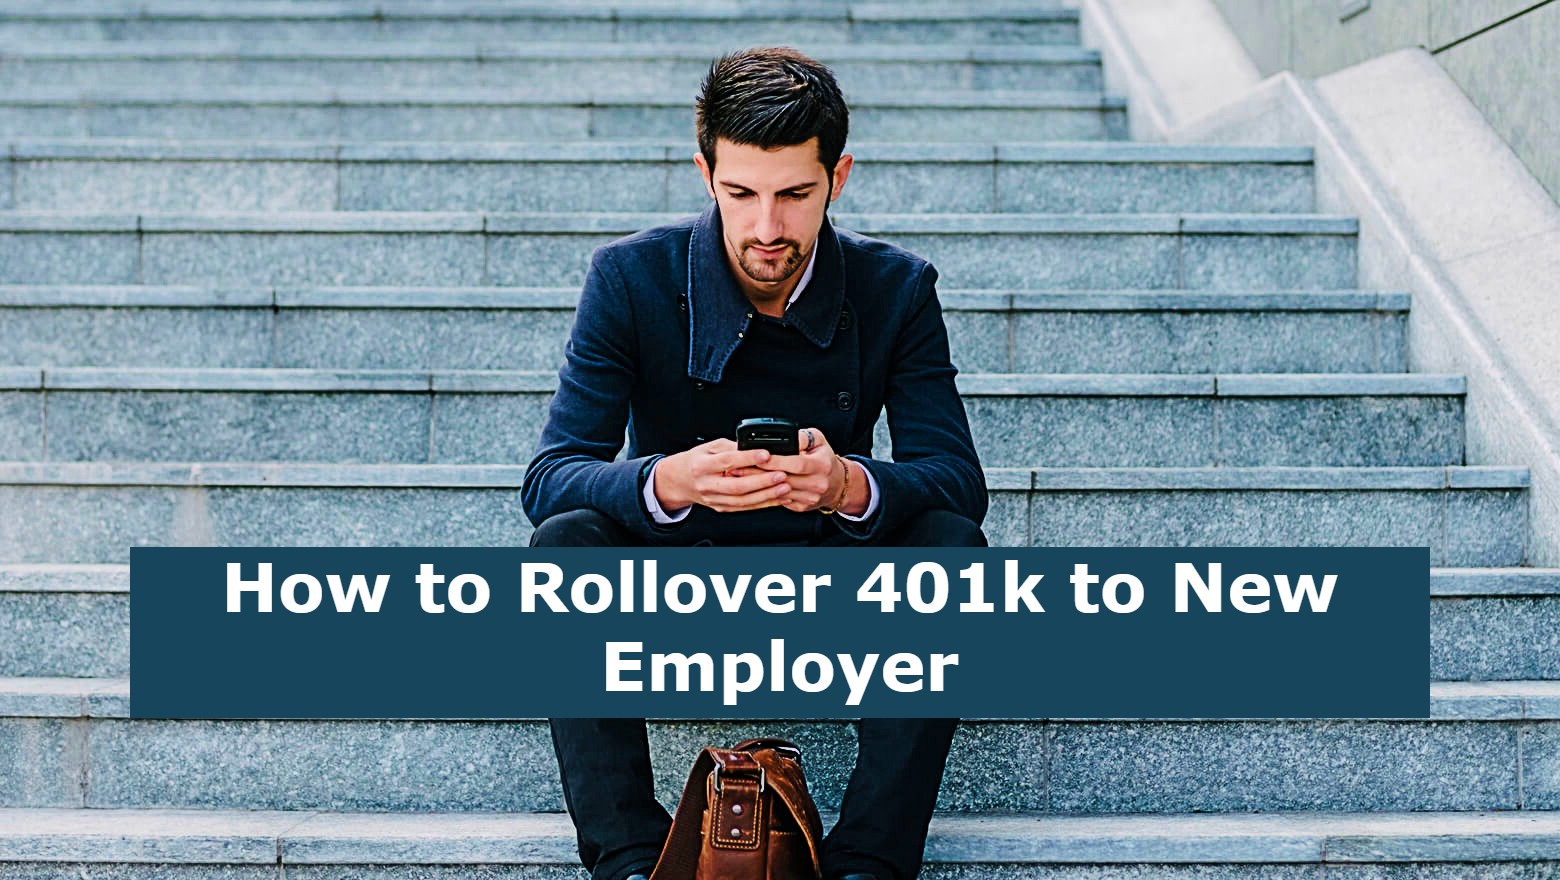 How to Rollover 401k to New Employer